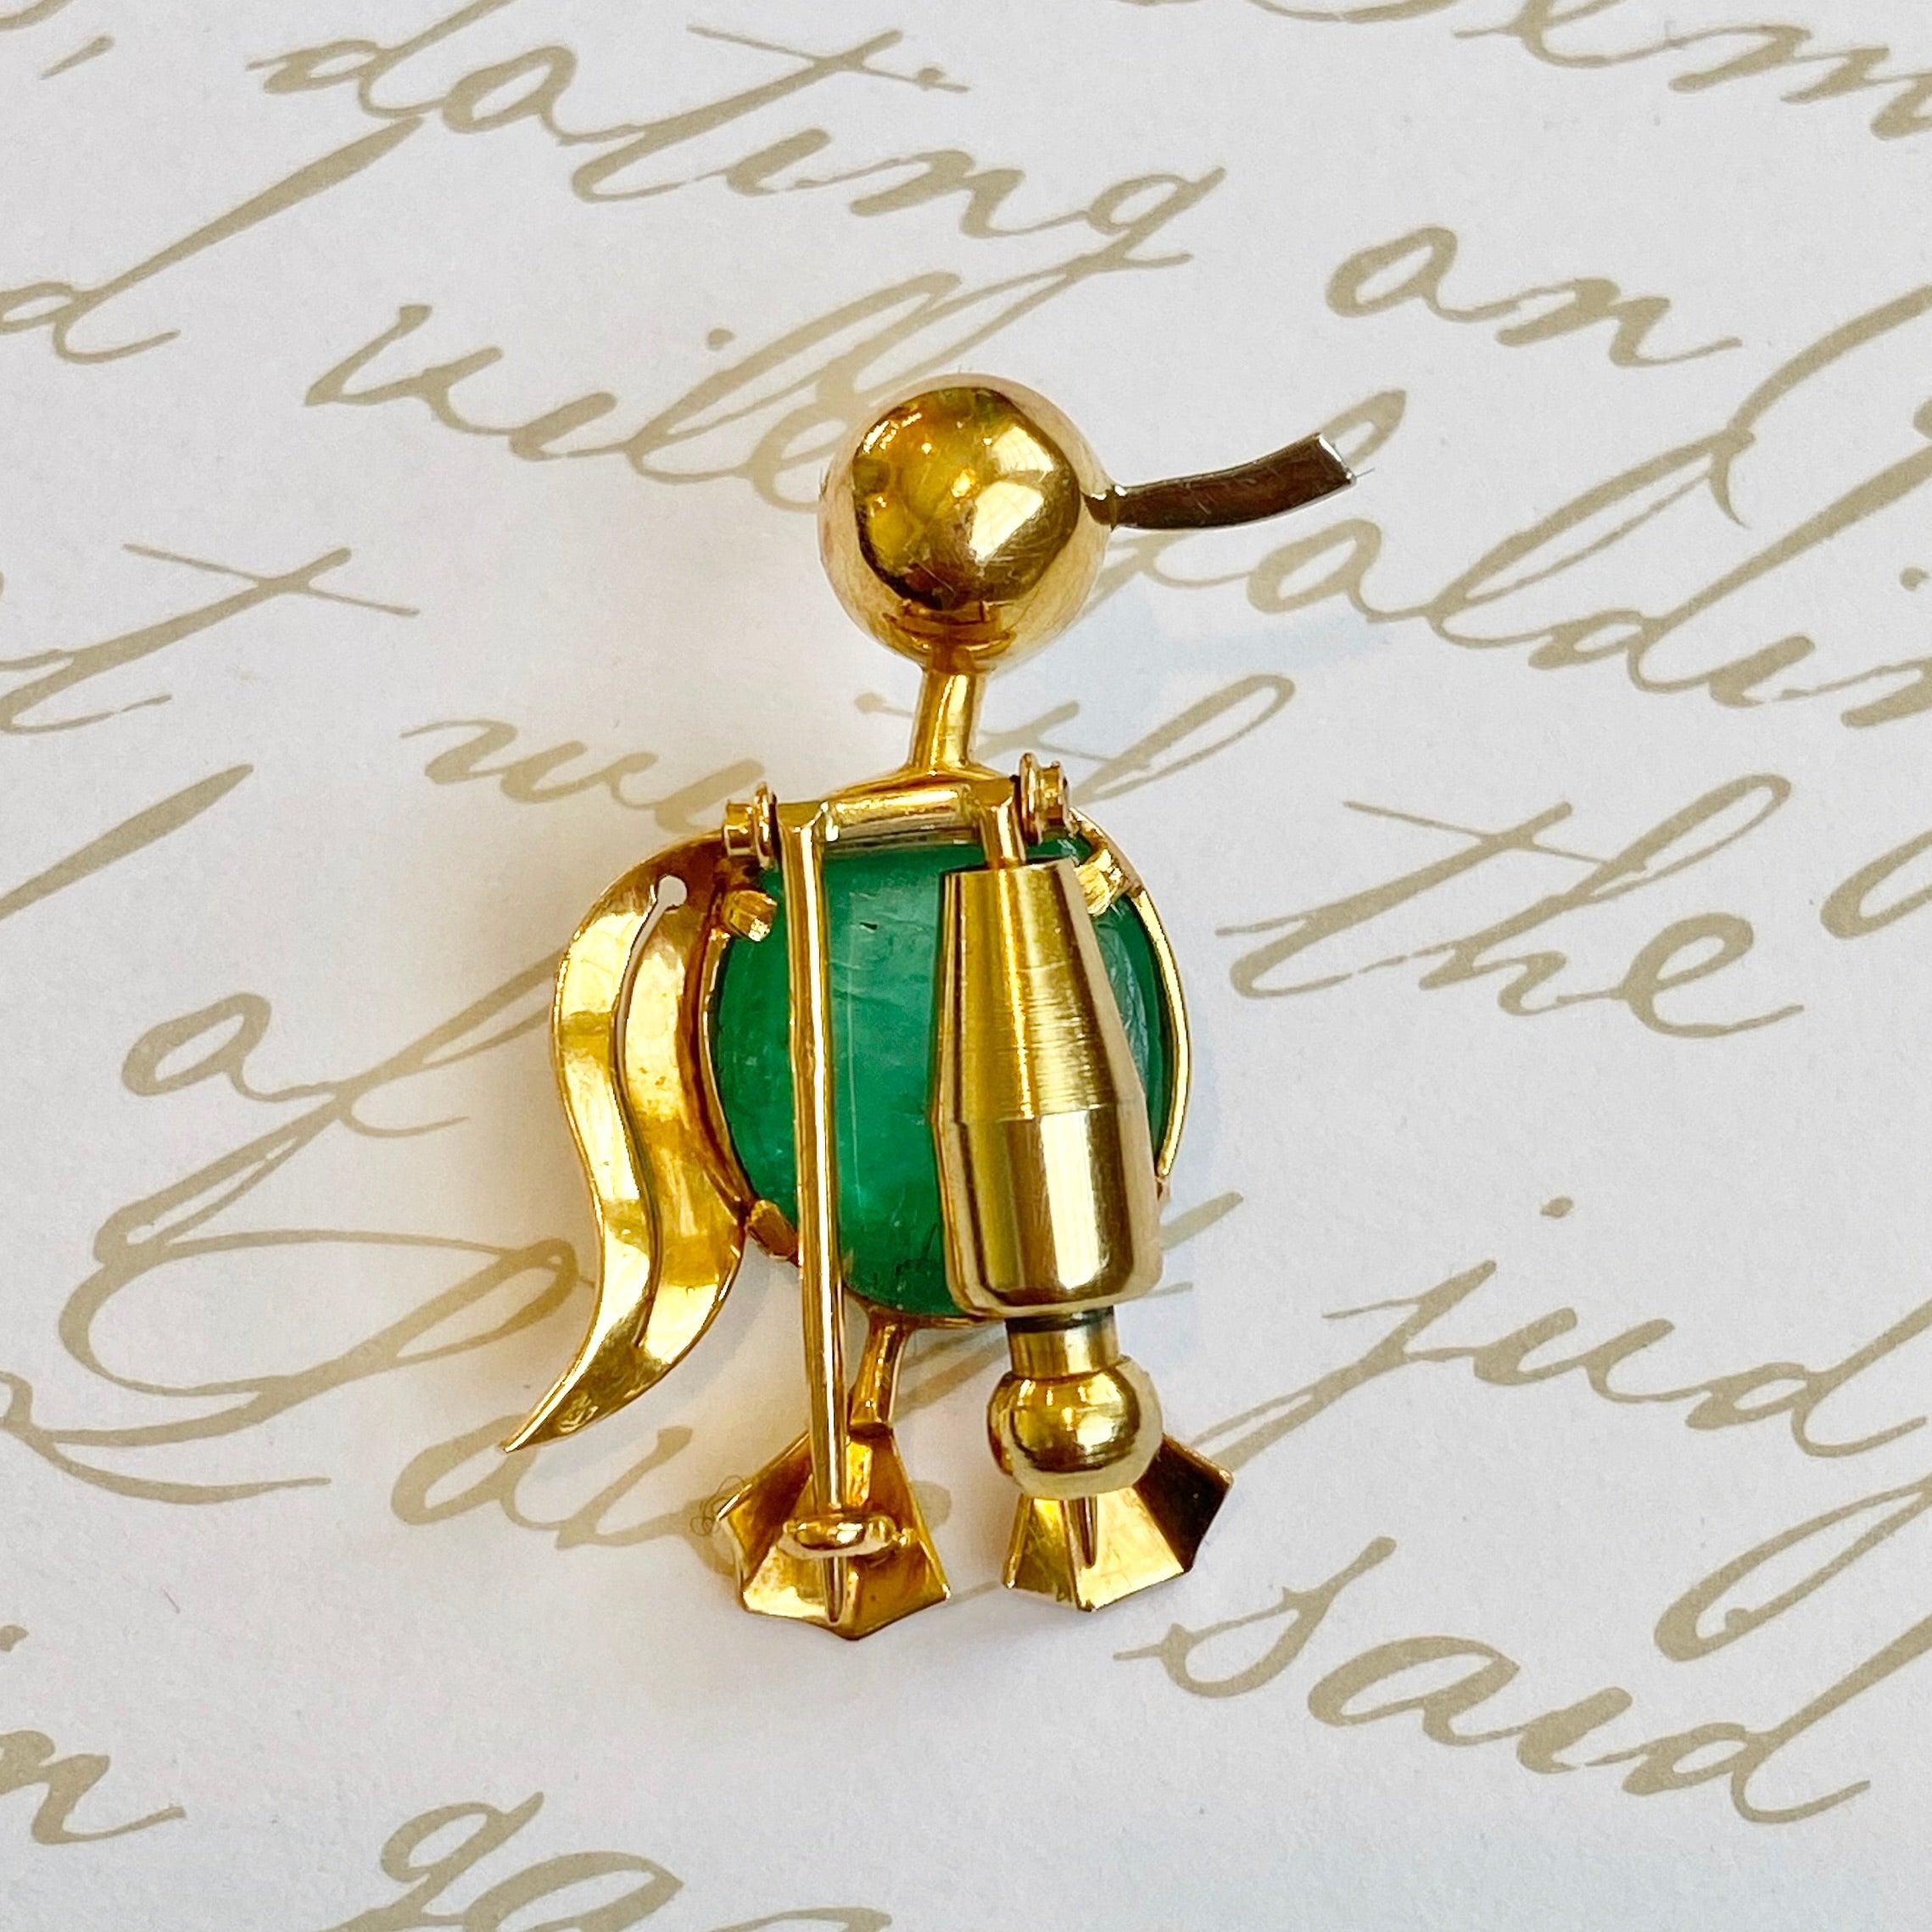 Vintage 18K yellow gold emerald cabochon bird brooch with white gold beak and eye.
Emerald: approx. 8.0ct.
Measurements: 32mm H x 22mm W x 11.5mm D
Weight: 6.2 grams
Stamped with the French 18K gold hallmark.